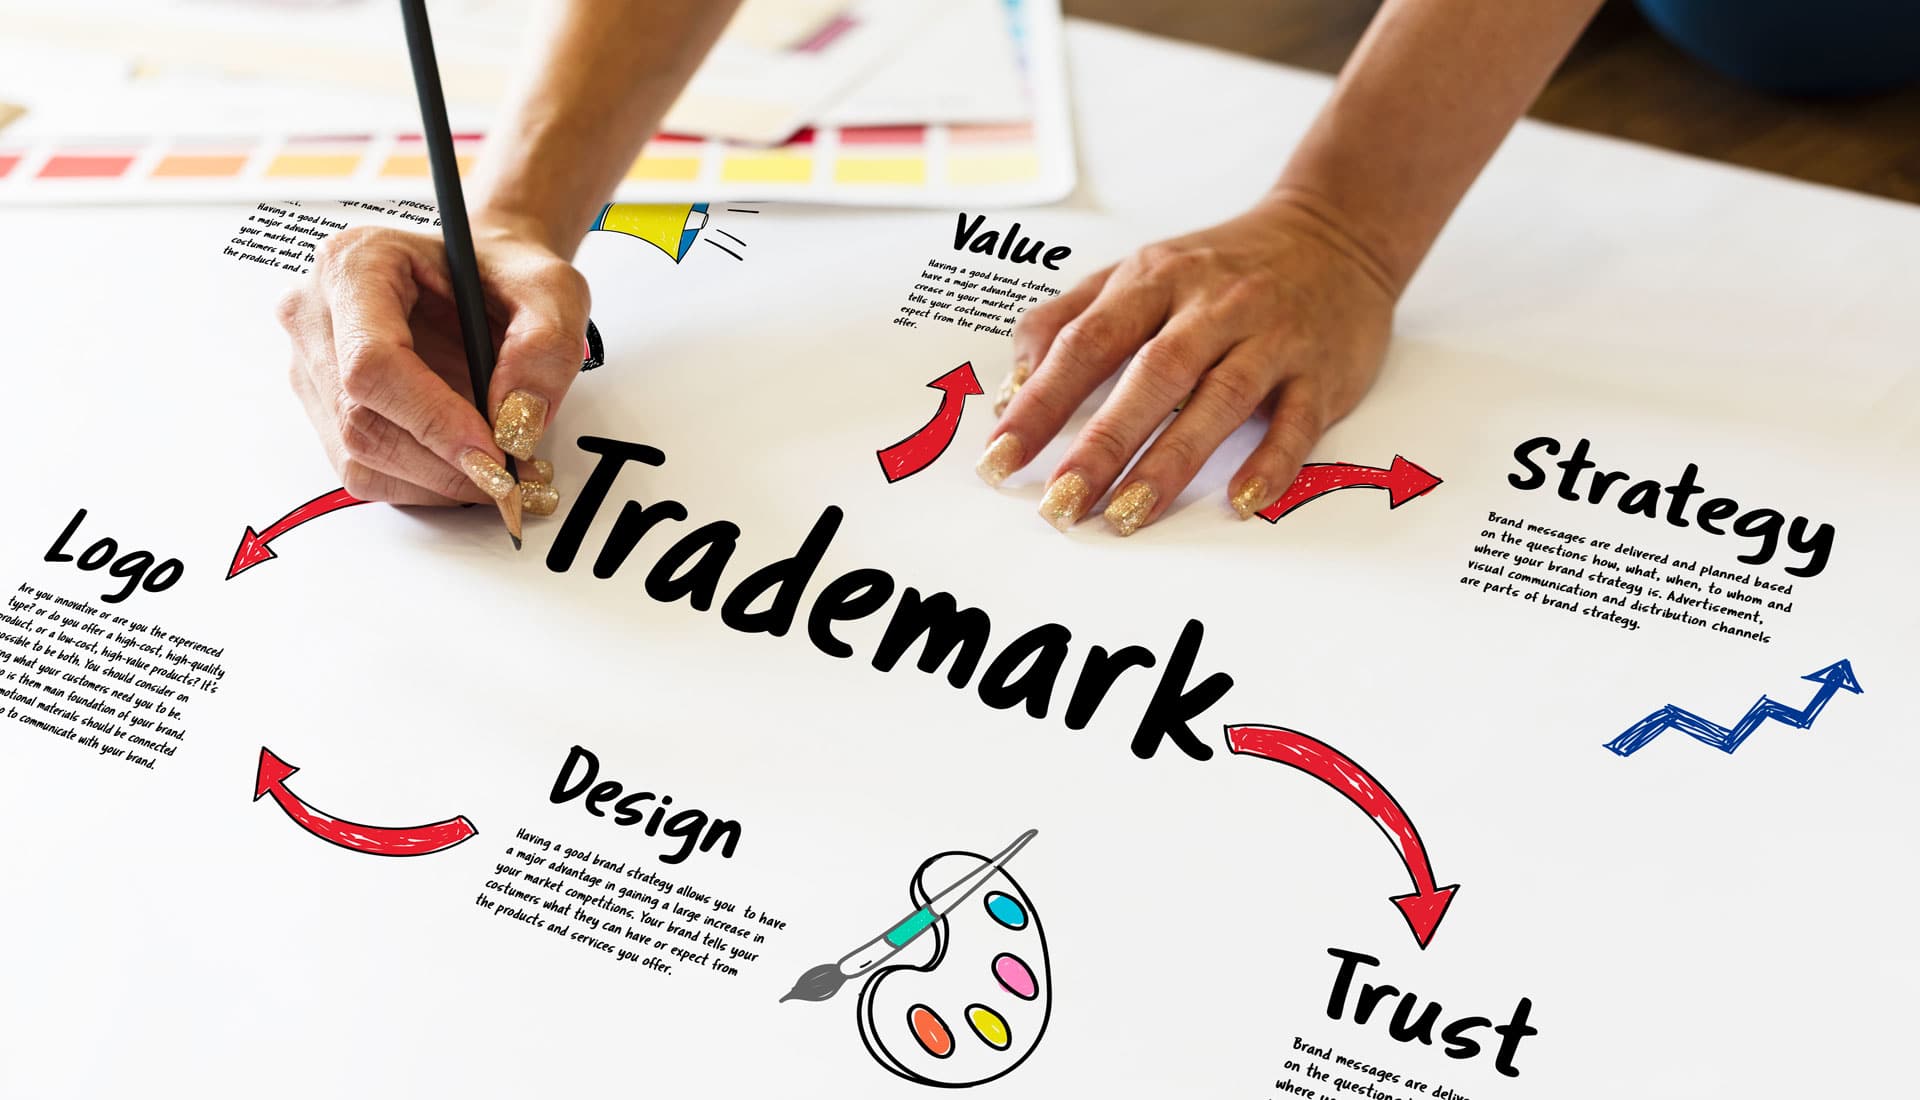 Trademarks and Their Relationship to Franchises